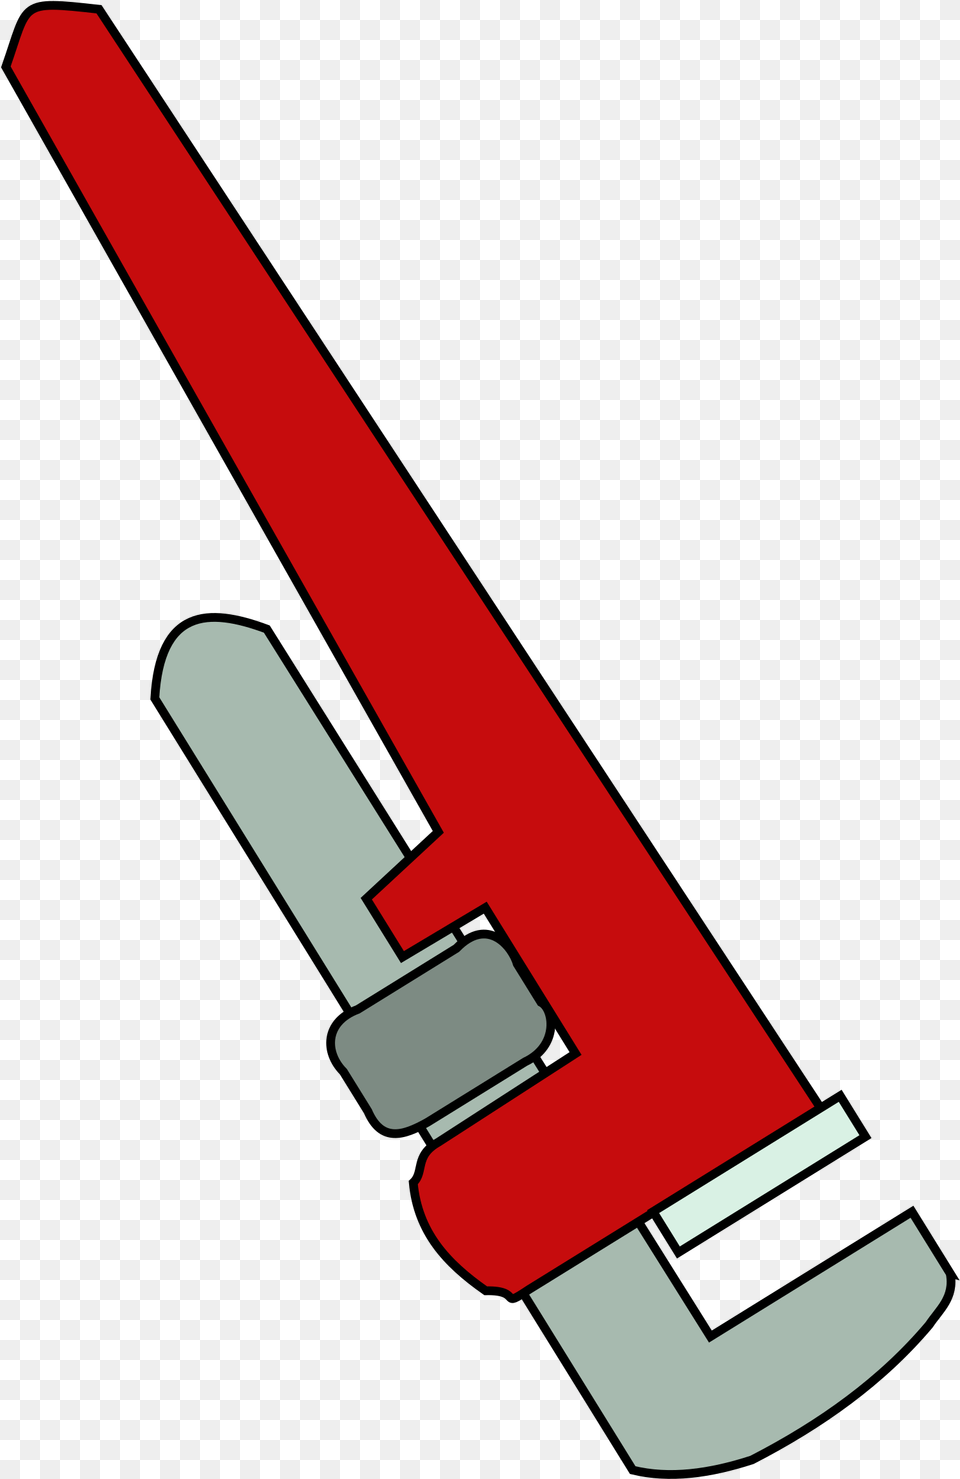 Anglelinepipe Wrench Blue Pipe Wrench Clipart Png Image